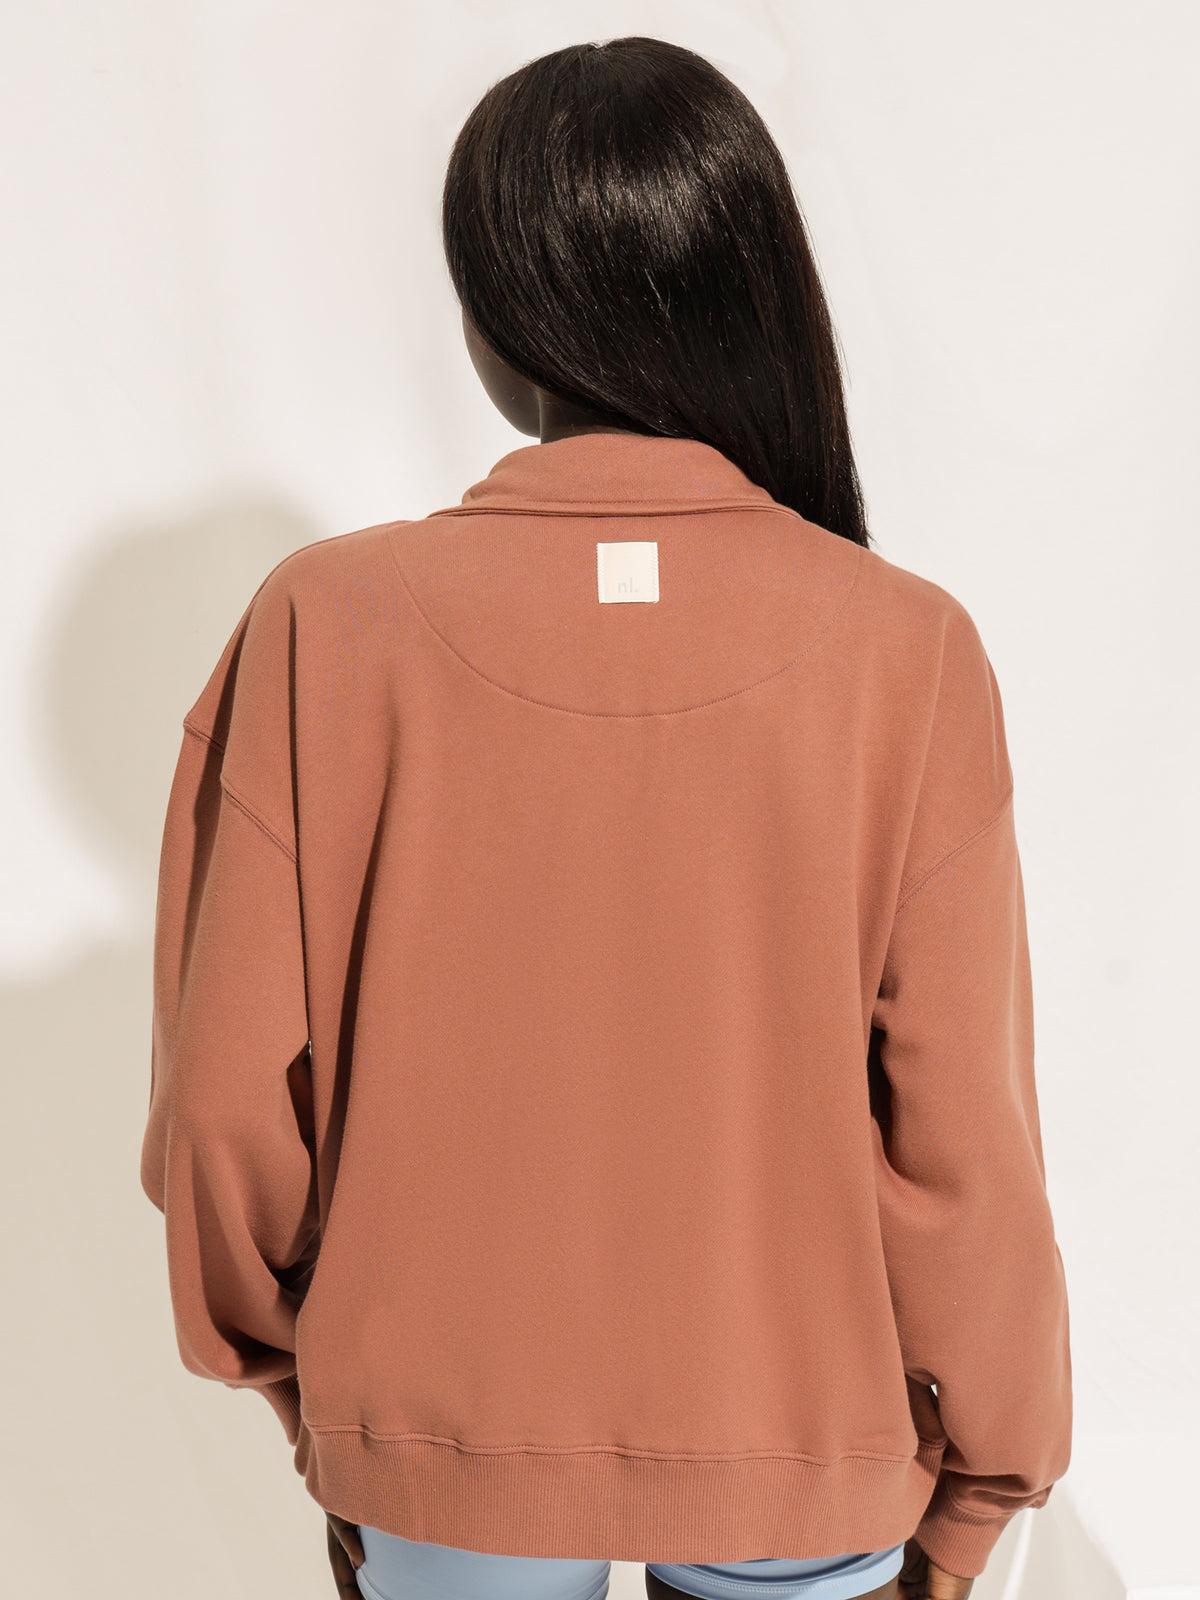 Nude Active Contrast Sweater in Rosewood